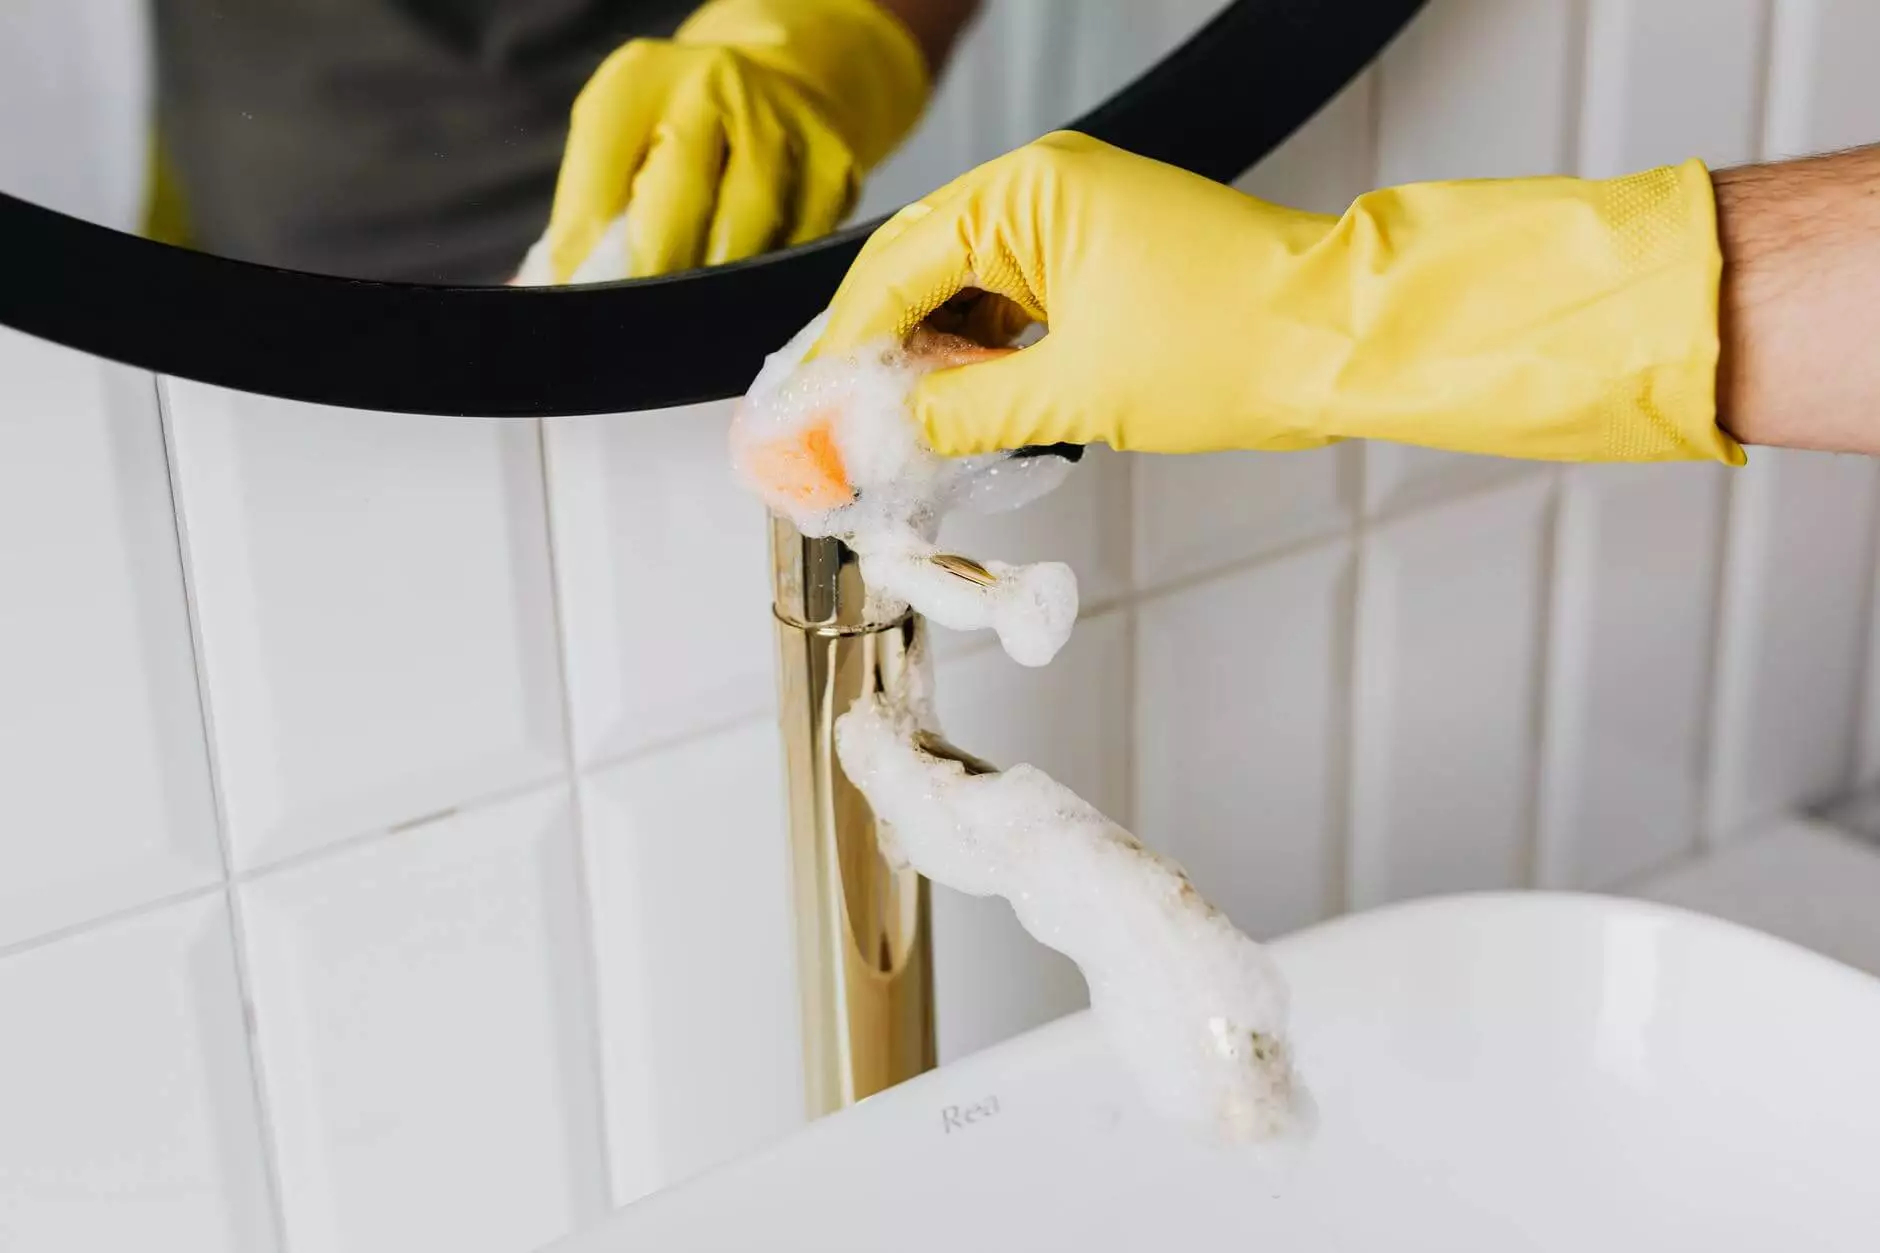 How to thoroughly clean and disinfect your home